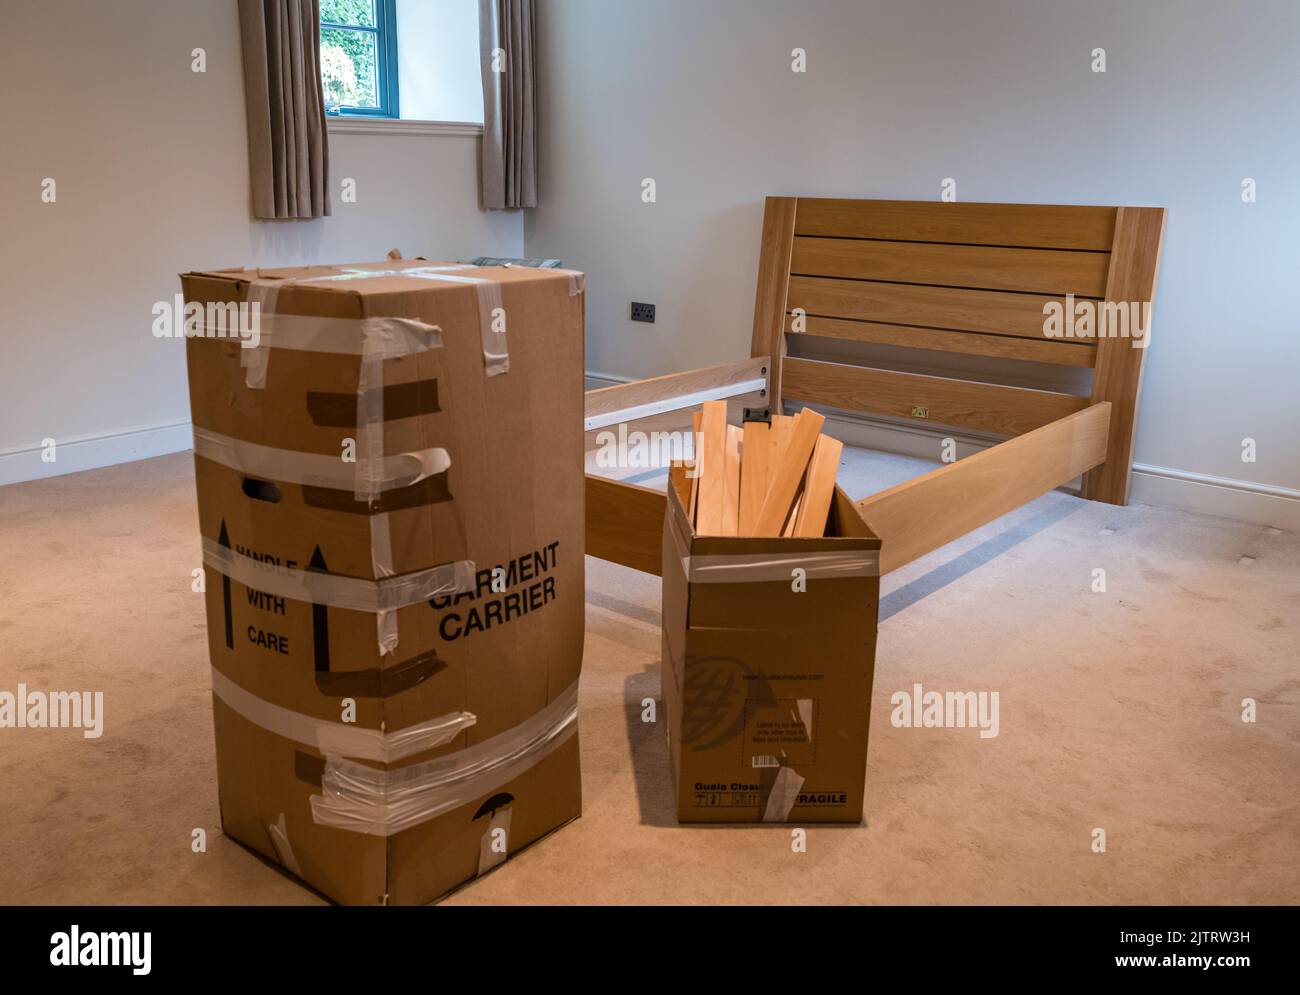 Packing and moving house with double bed dismantled for storage in bedroom and boxes packed ready for removals, Scotland, UK Stock Photo